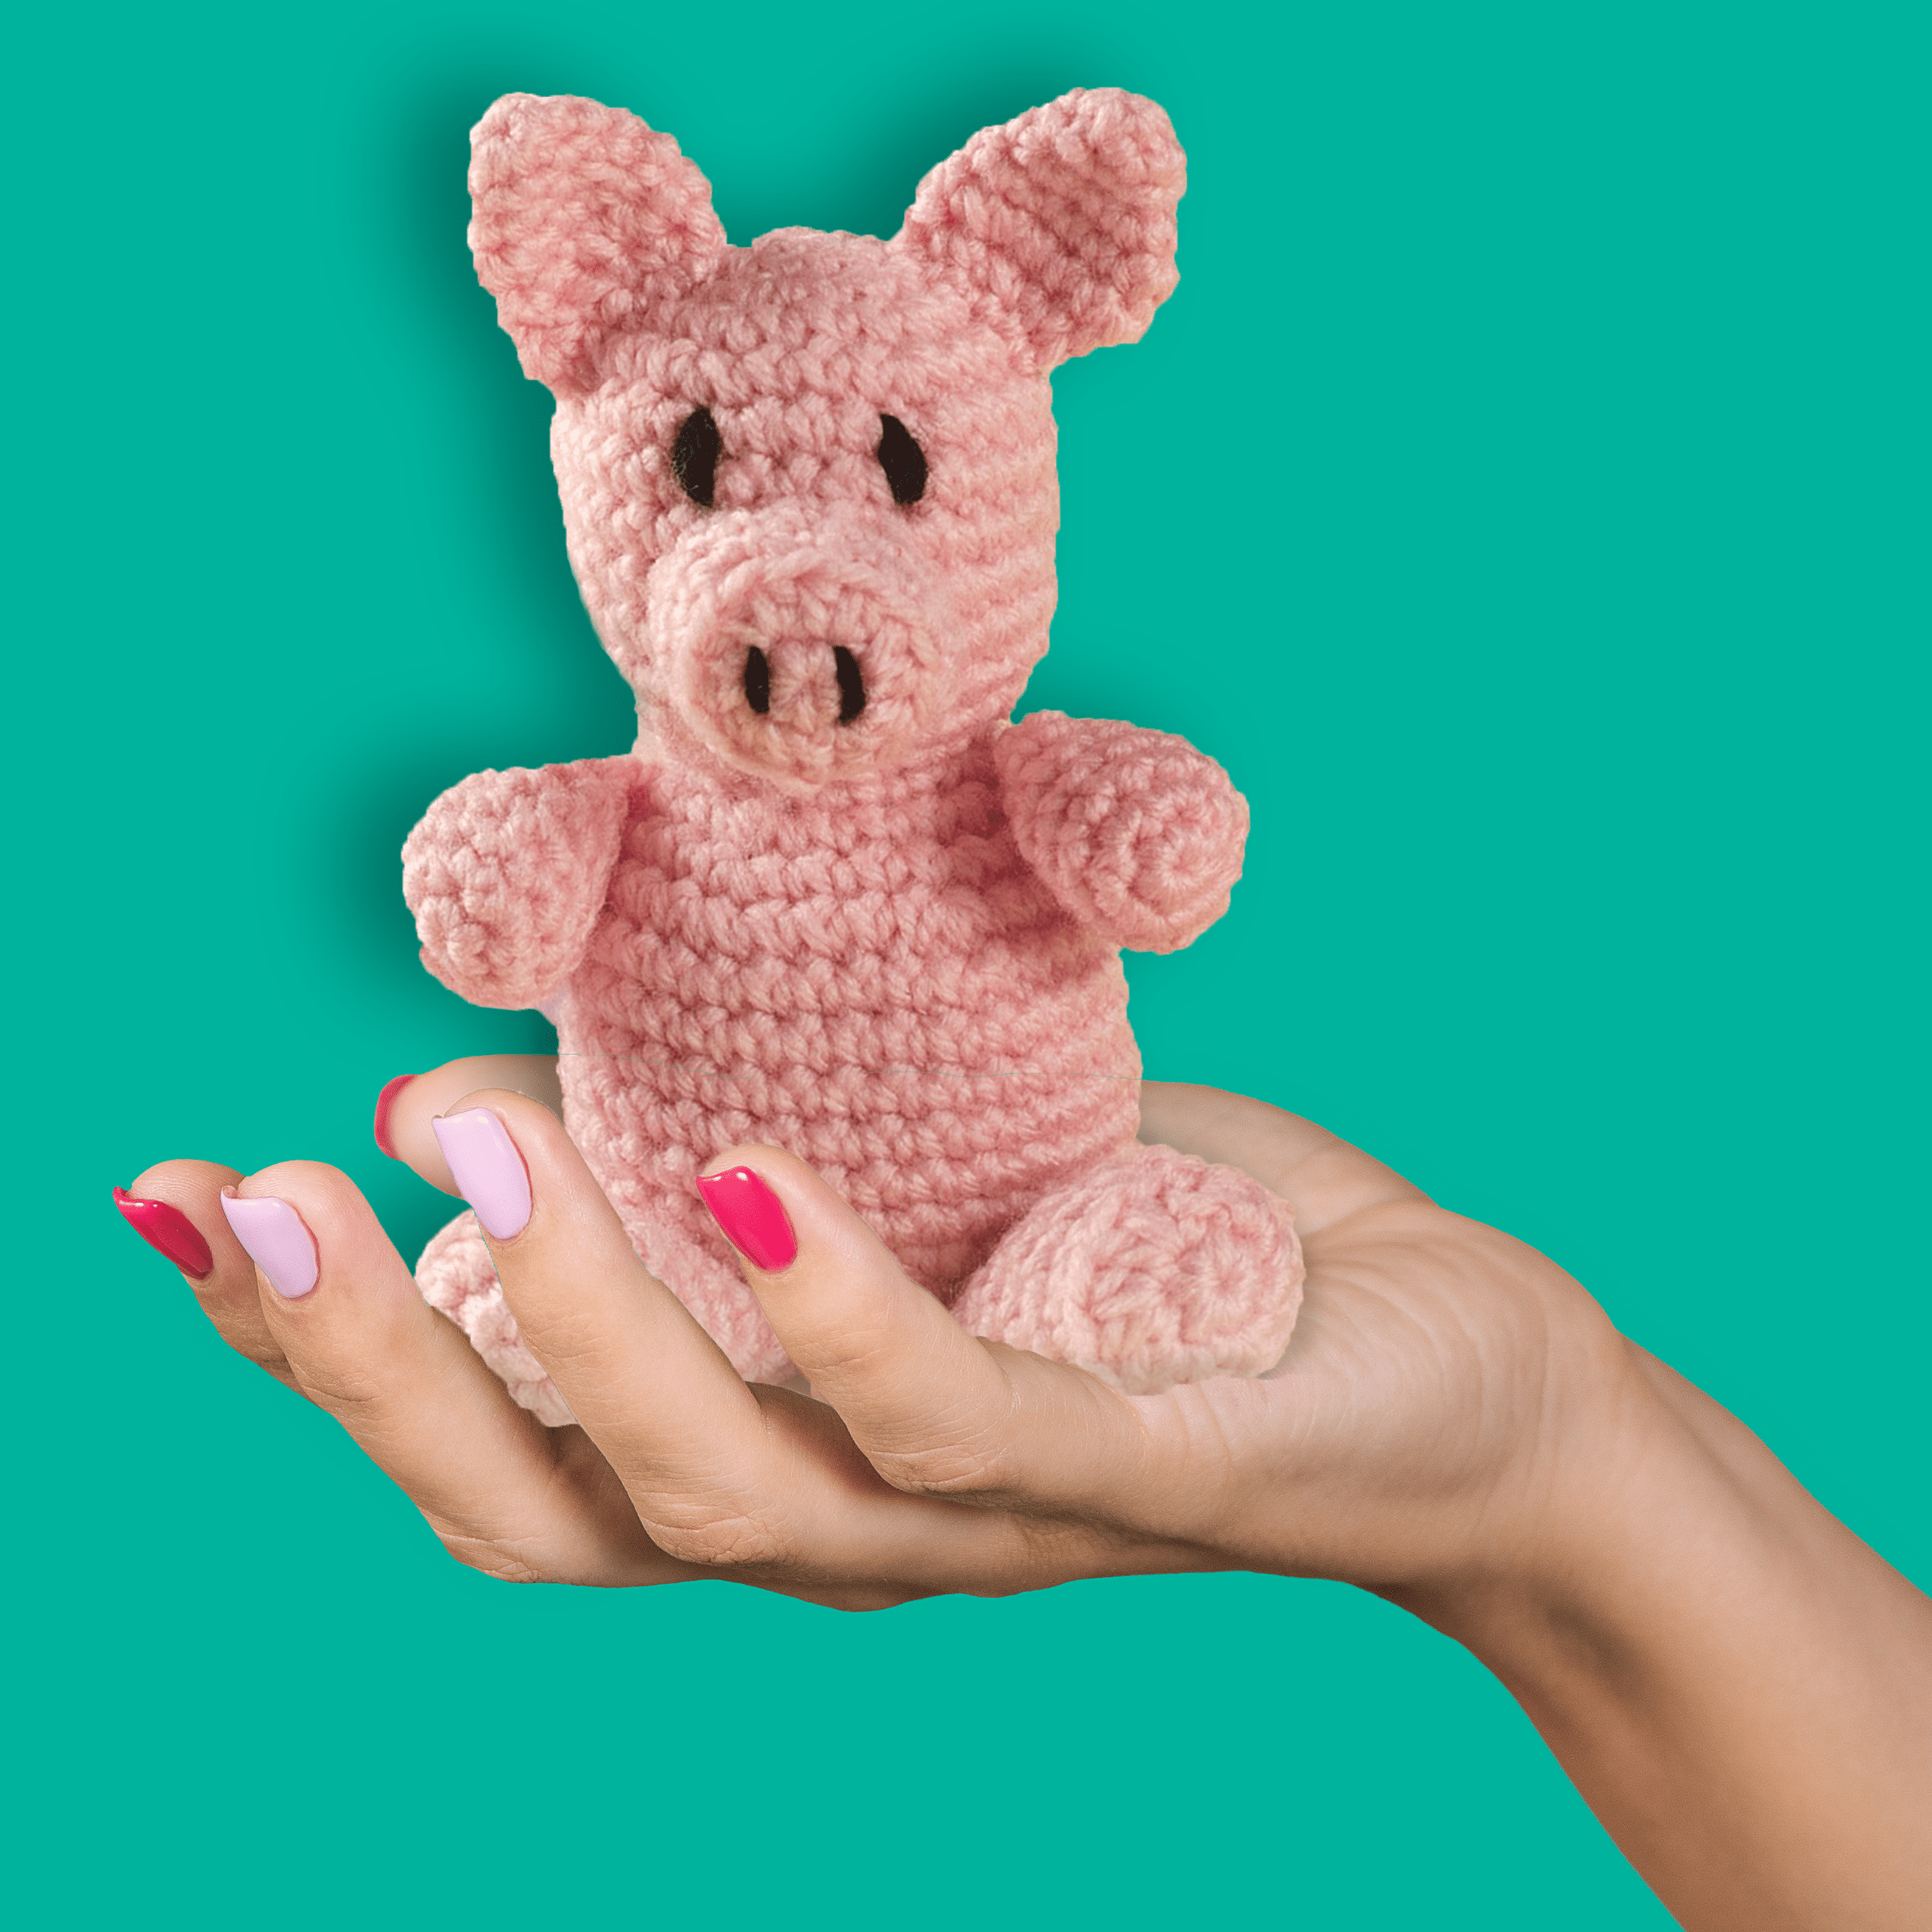 Leisure Arts Little Crochet Friend Animals Crochet Kit, Pig, 8, Complete  Crochet kit, Learn to Crochet Animal Starter kit for All Ages, Includes  Instructions, DIY amigurumi Crochet Kits 